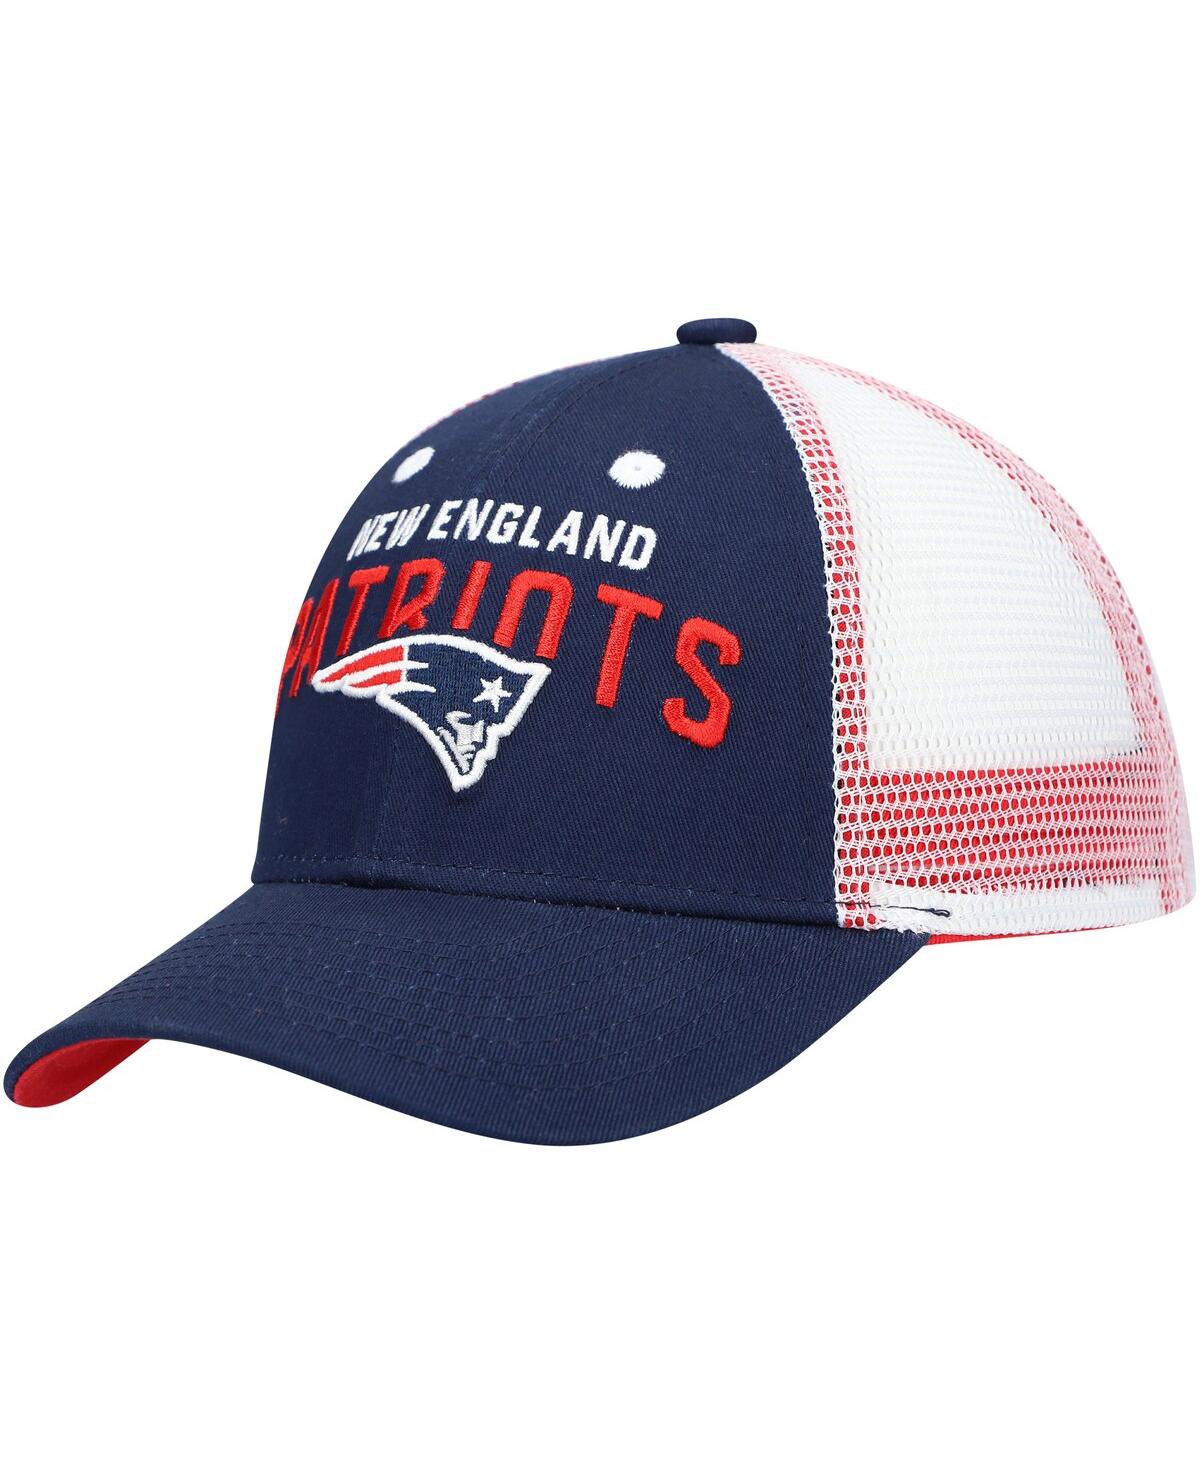 Outerstuff Babies' Preschool Unisex Navy, White New England Patriots Core Lockup Mesh Back Snapback Hat In Navy,white